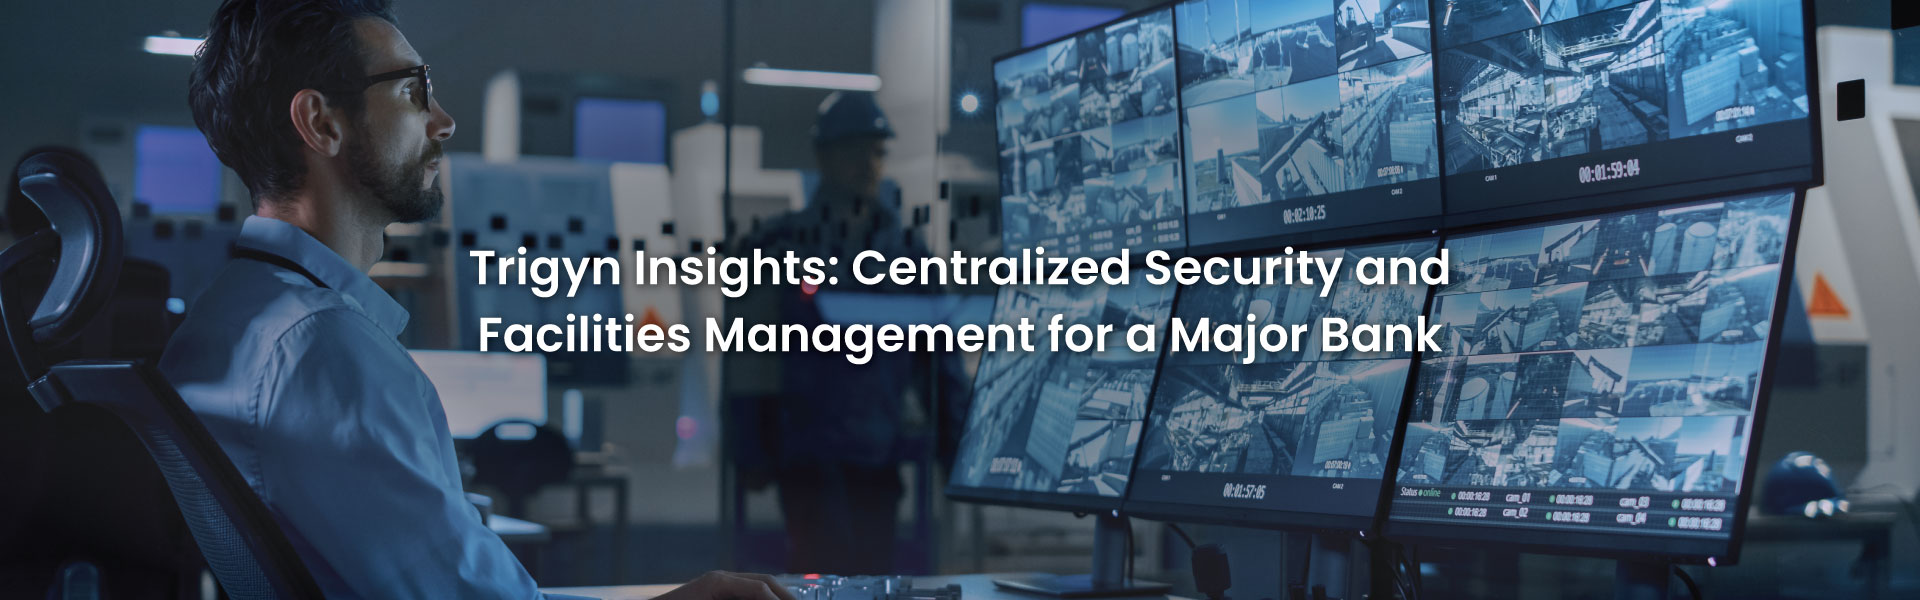 Centralized Security and Facilities Management for a Major Bank